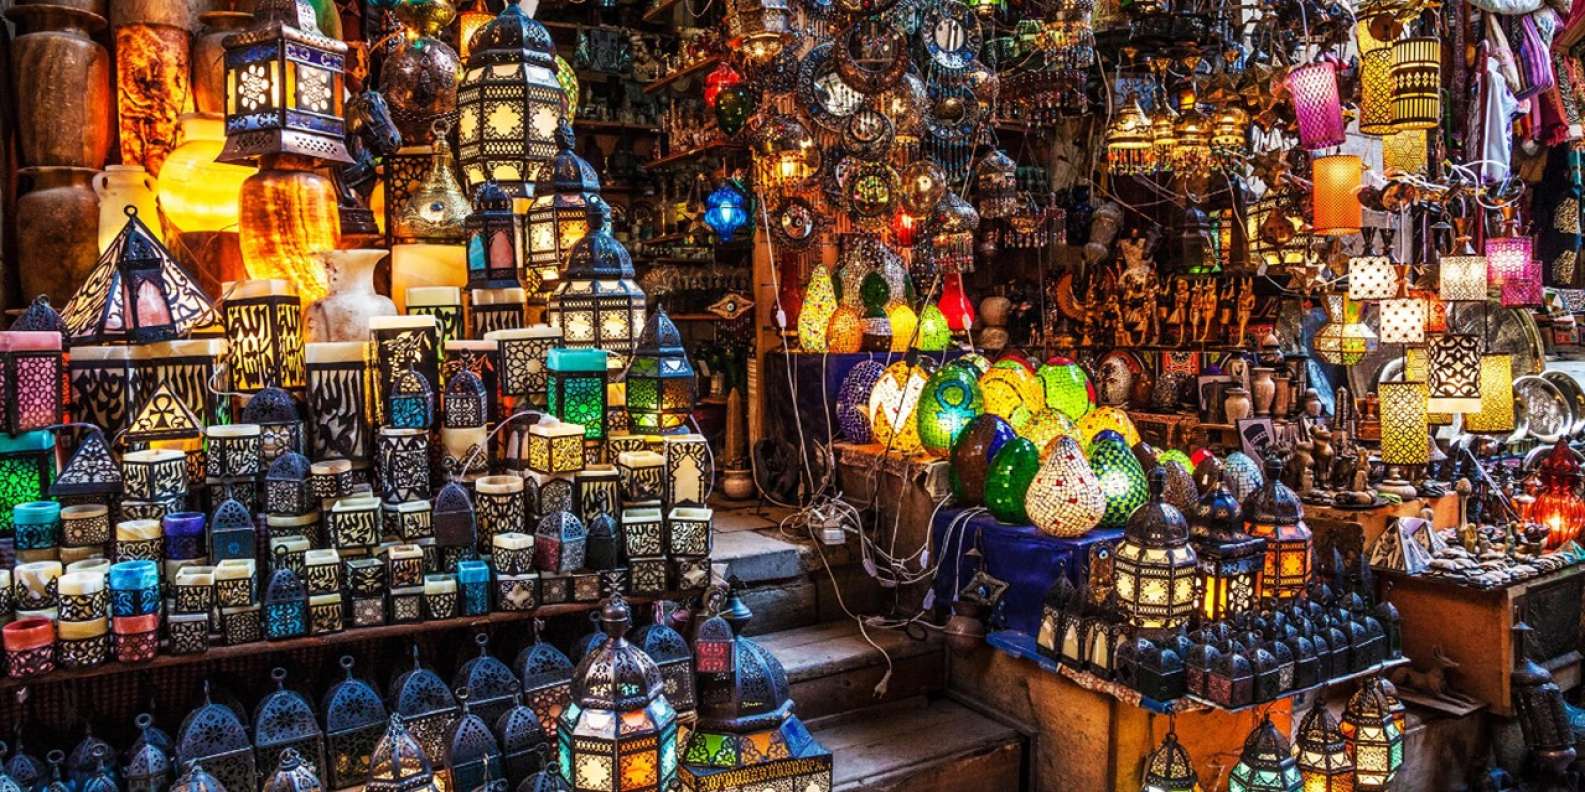 Cairo Artisan Adventures: Exploring Handcrafted Treasures - Visit to Local Markets and Artisan Workshops